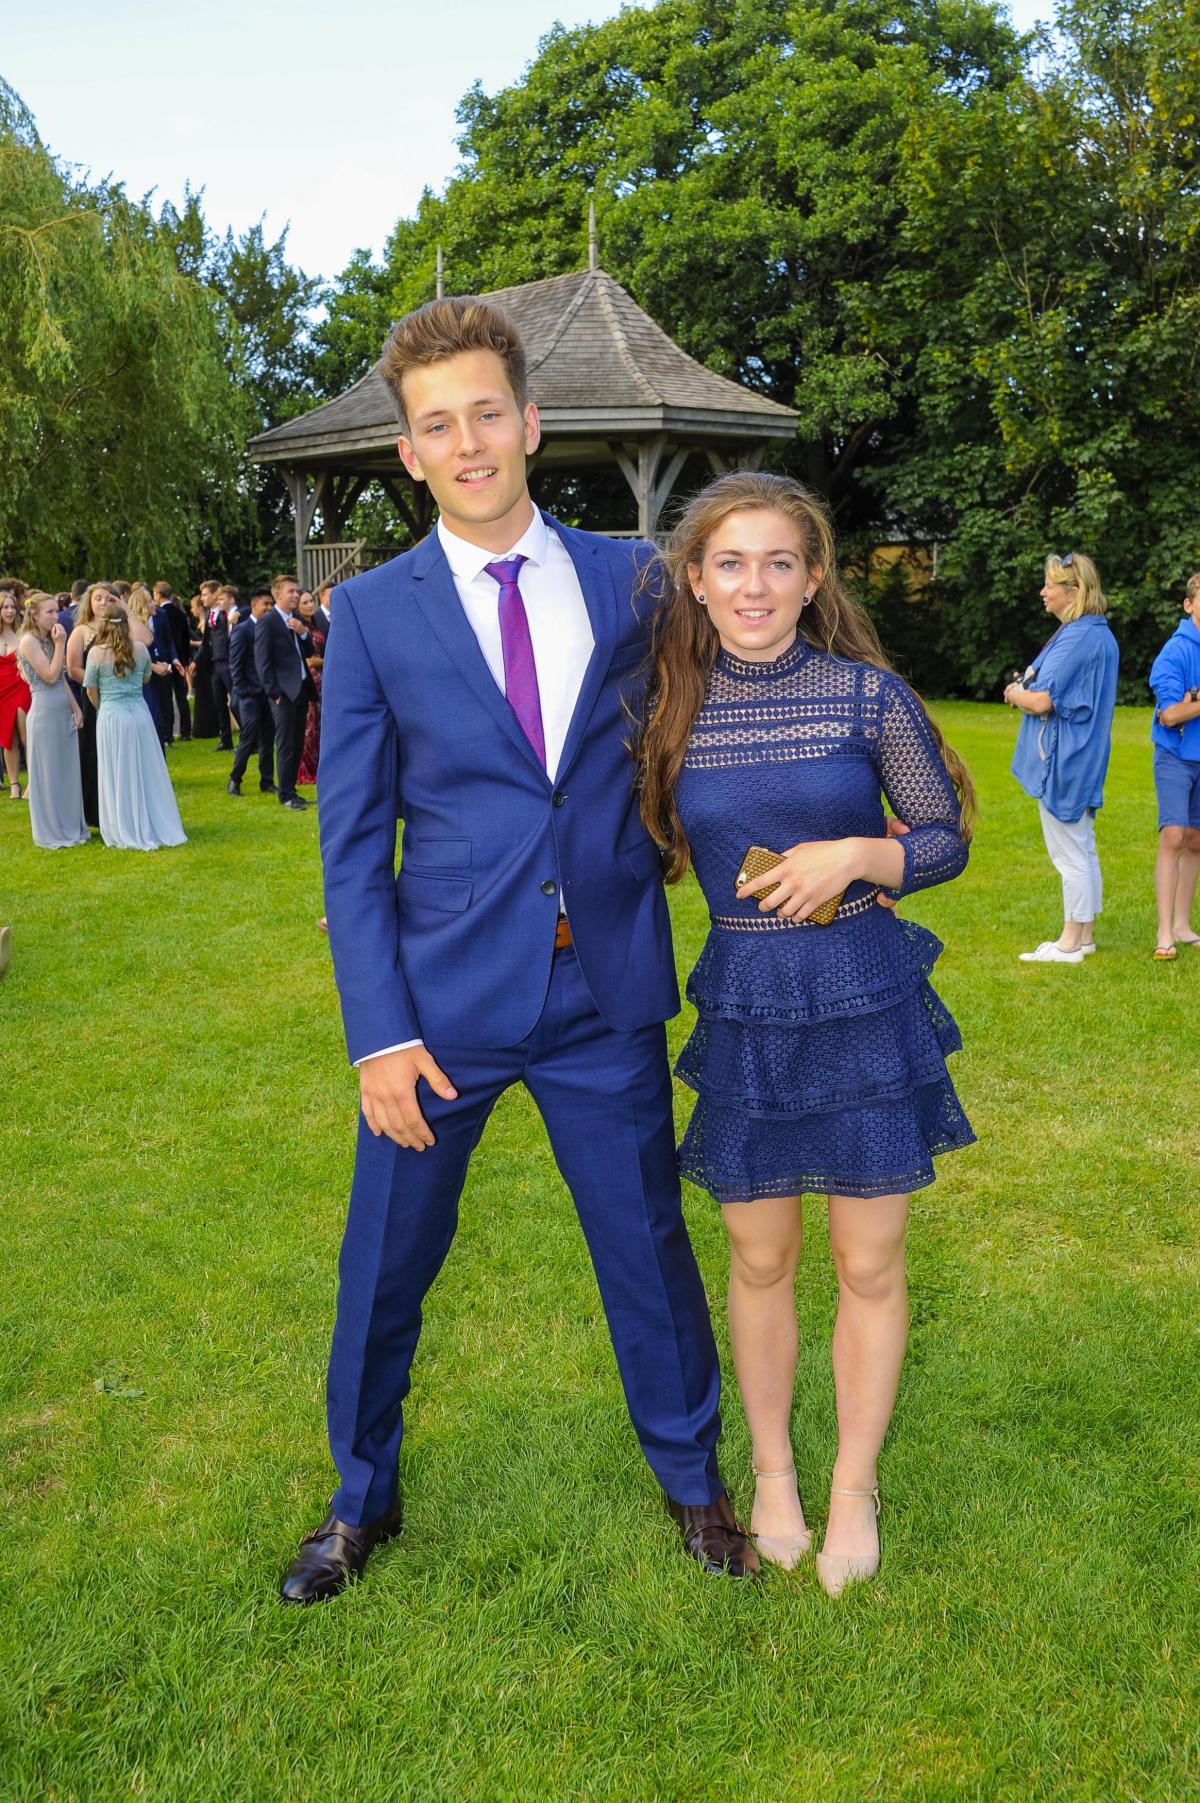 Ollie Rodger and Ella Merriett, Pictures: GRAHAM HUNT PHOTOGRAPHY